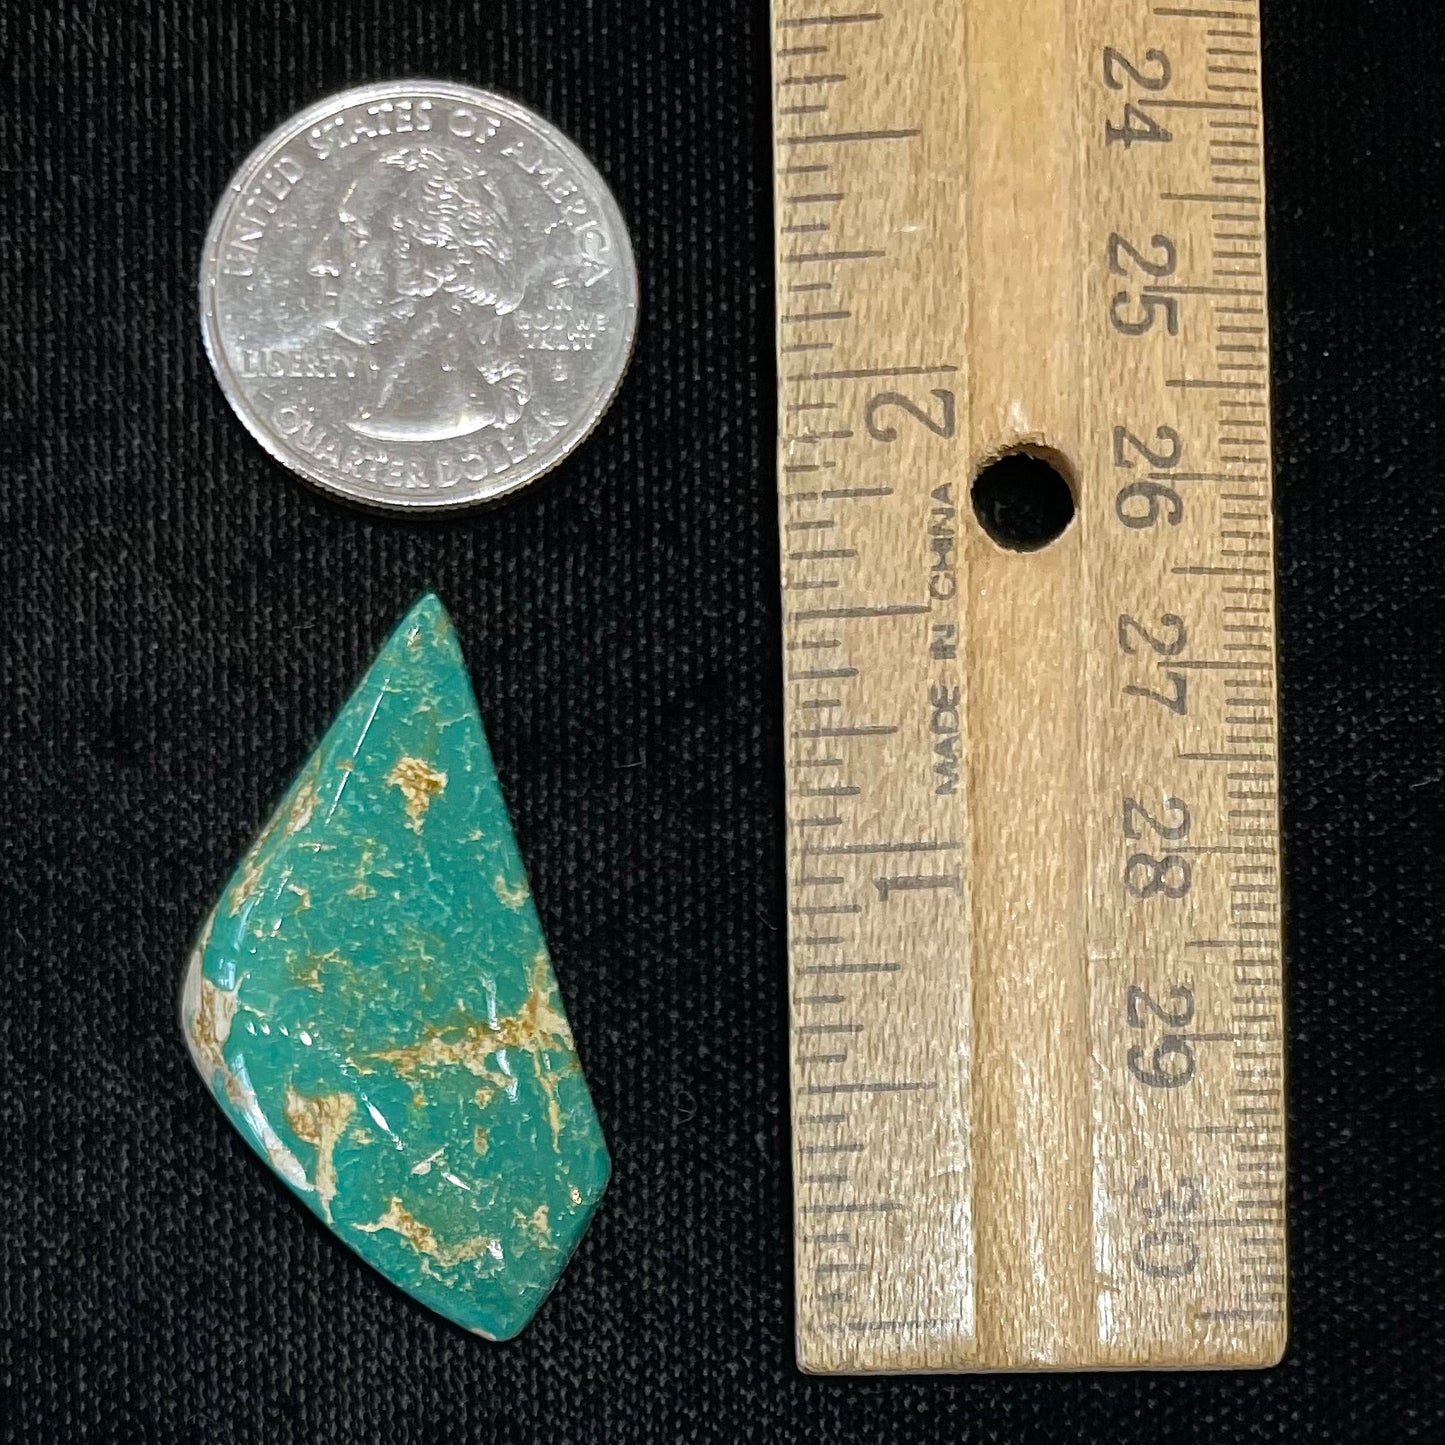 A loose, freeform cabochon cut green turquoise stone from Royston Mining District, Nevada.